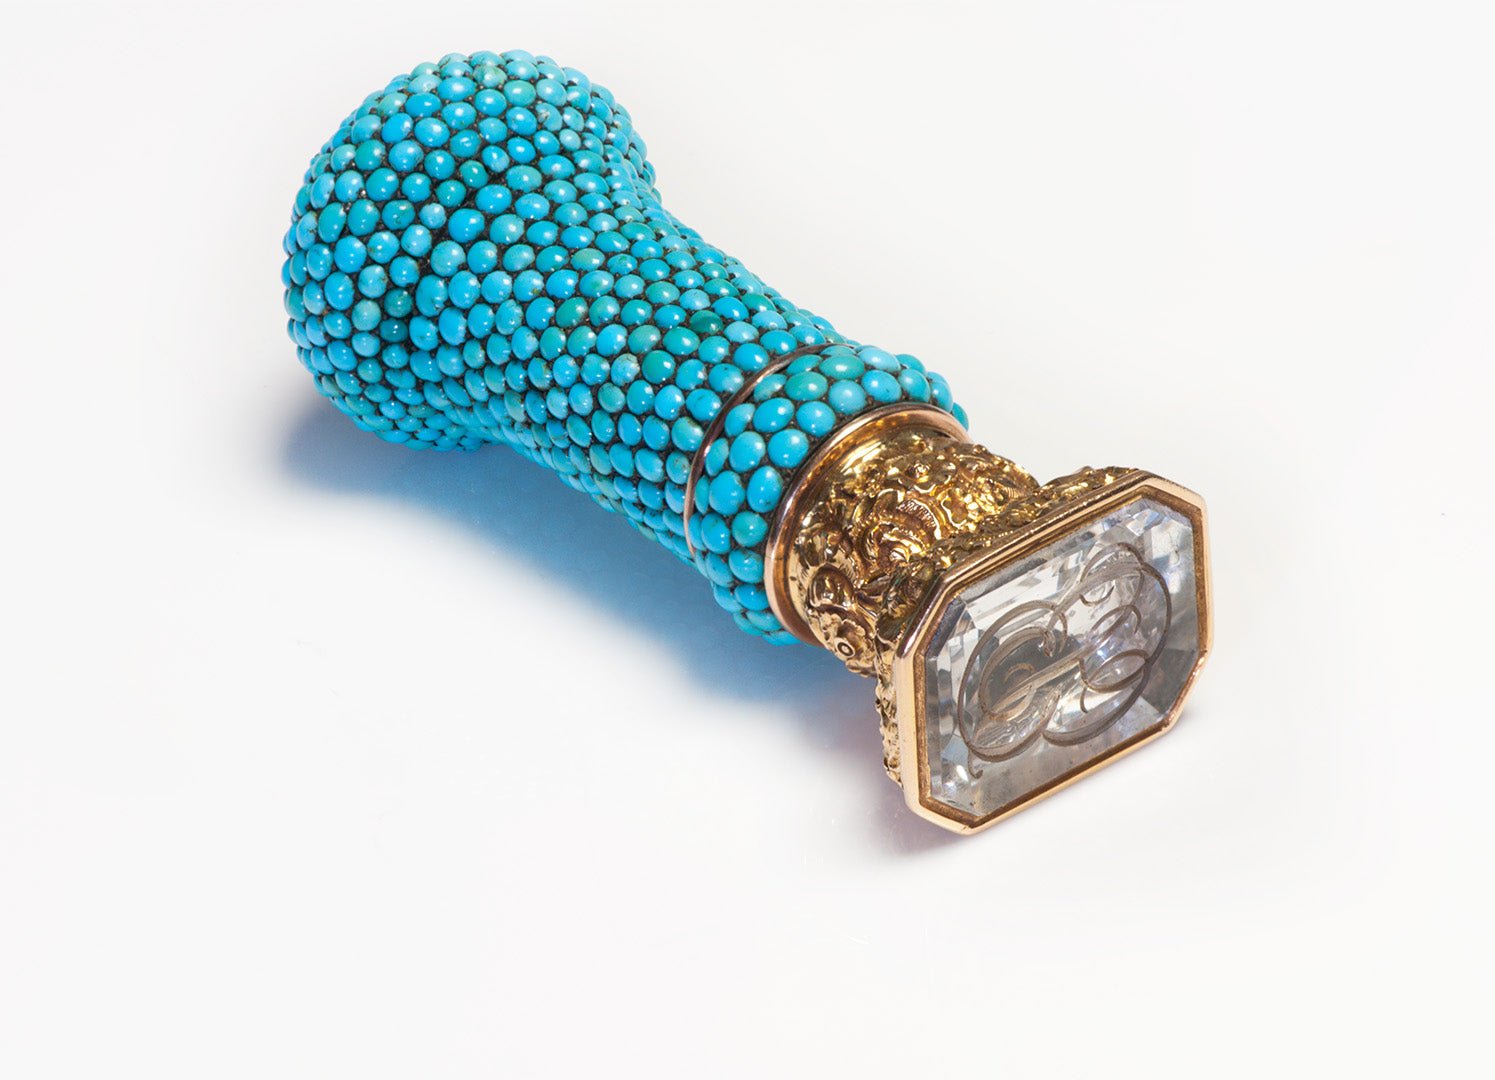 Magnificent Antique Gold Seal Encrusted with Turquoise